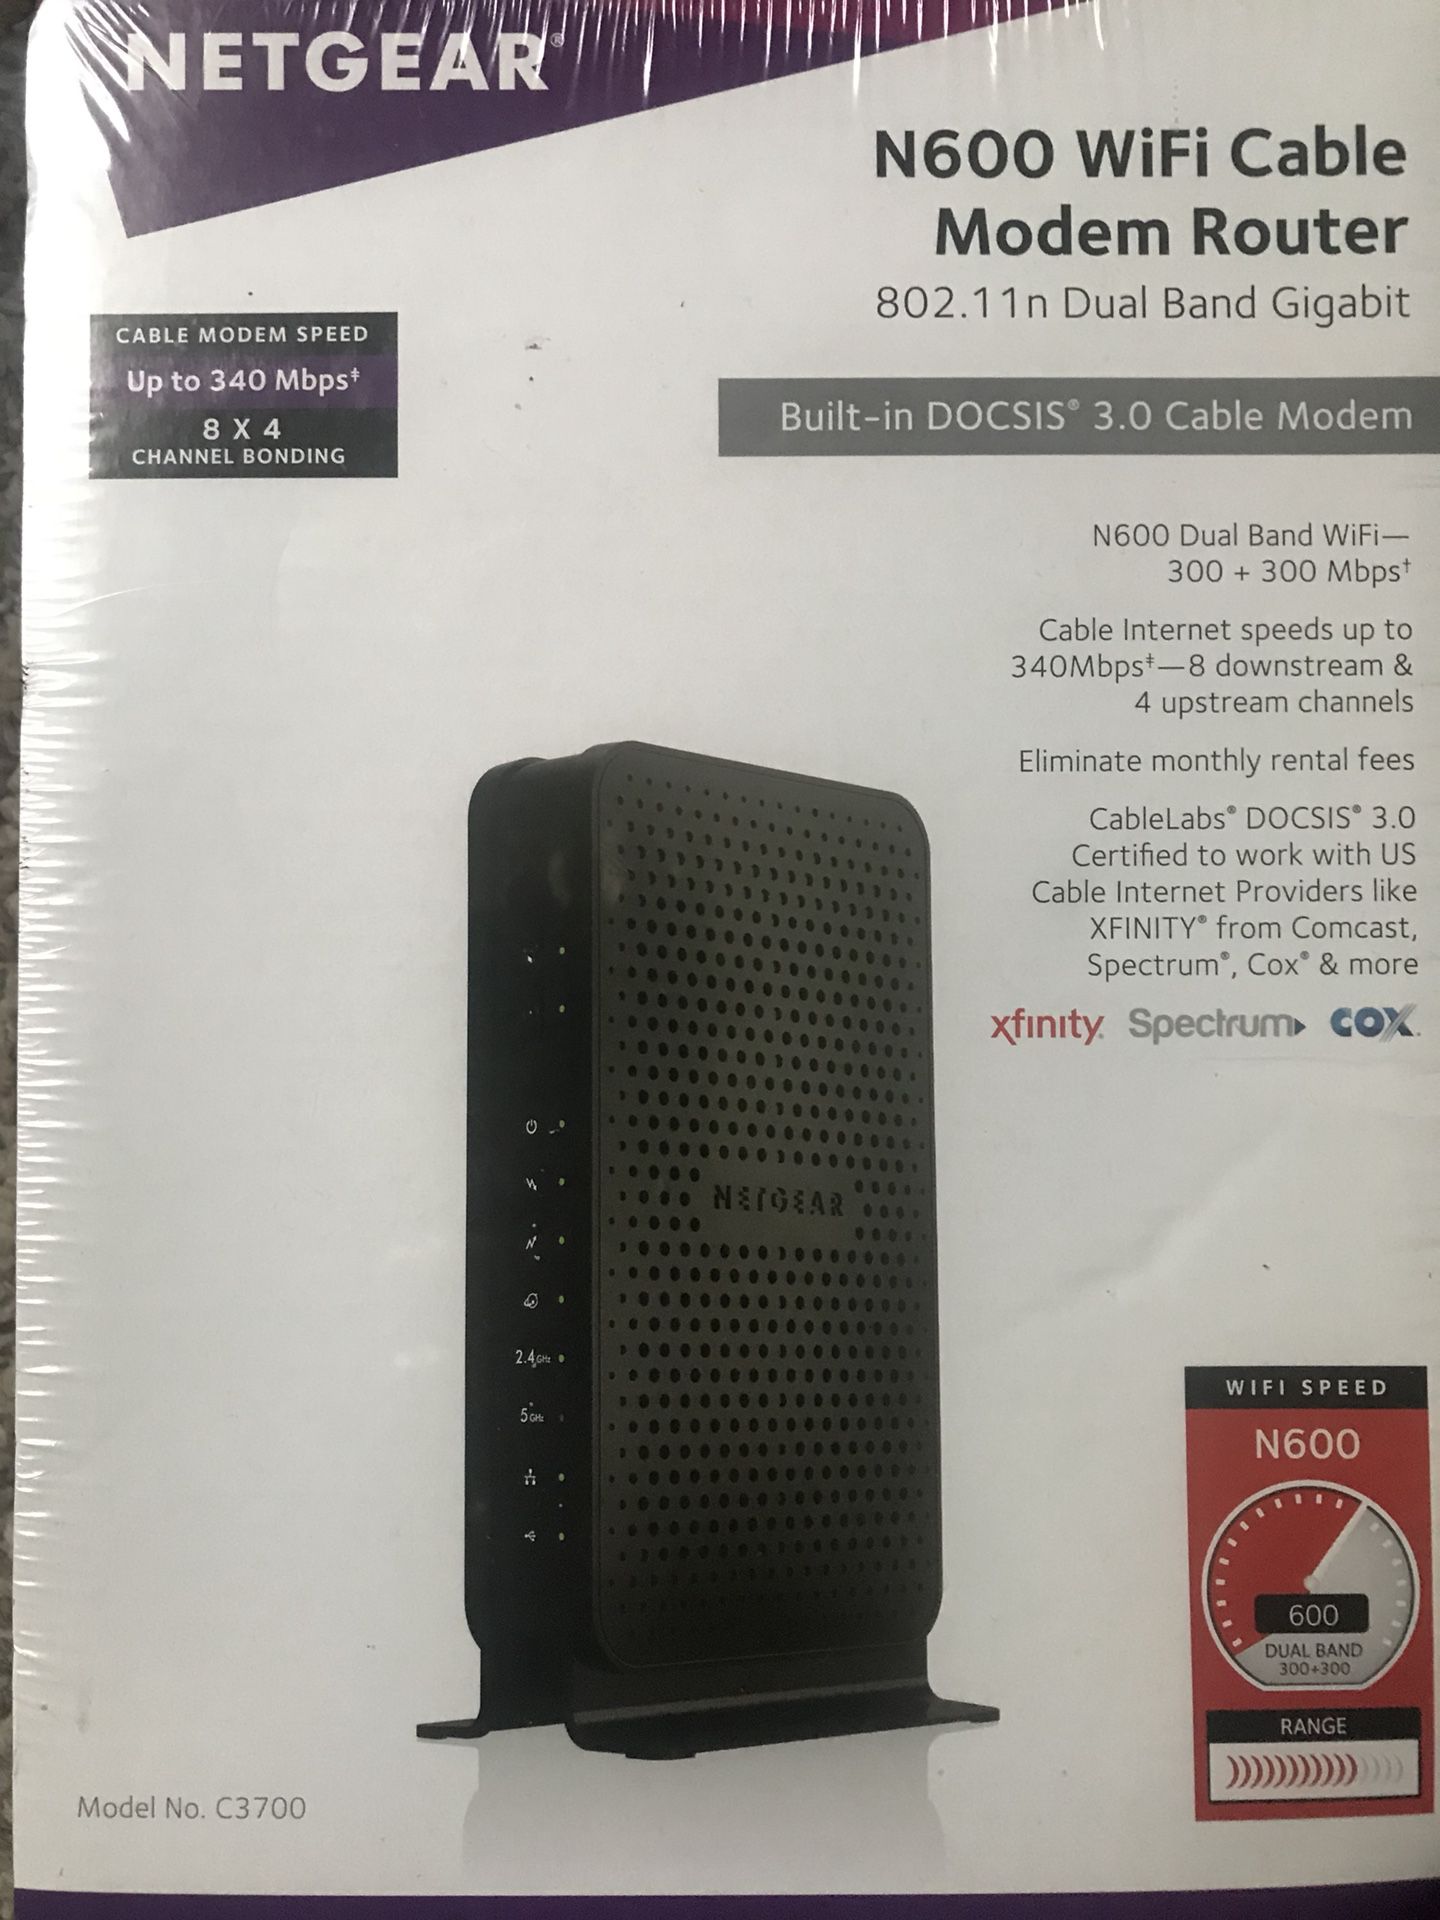 Brand new Netgear Cable Modem Router